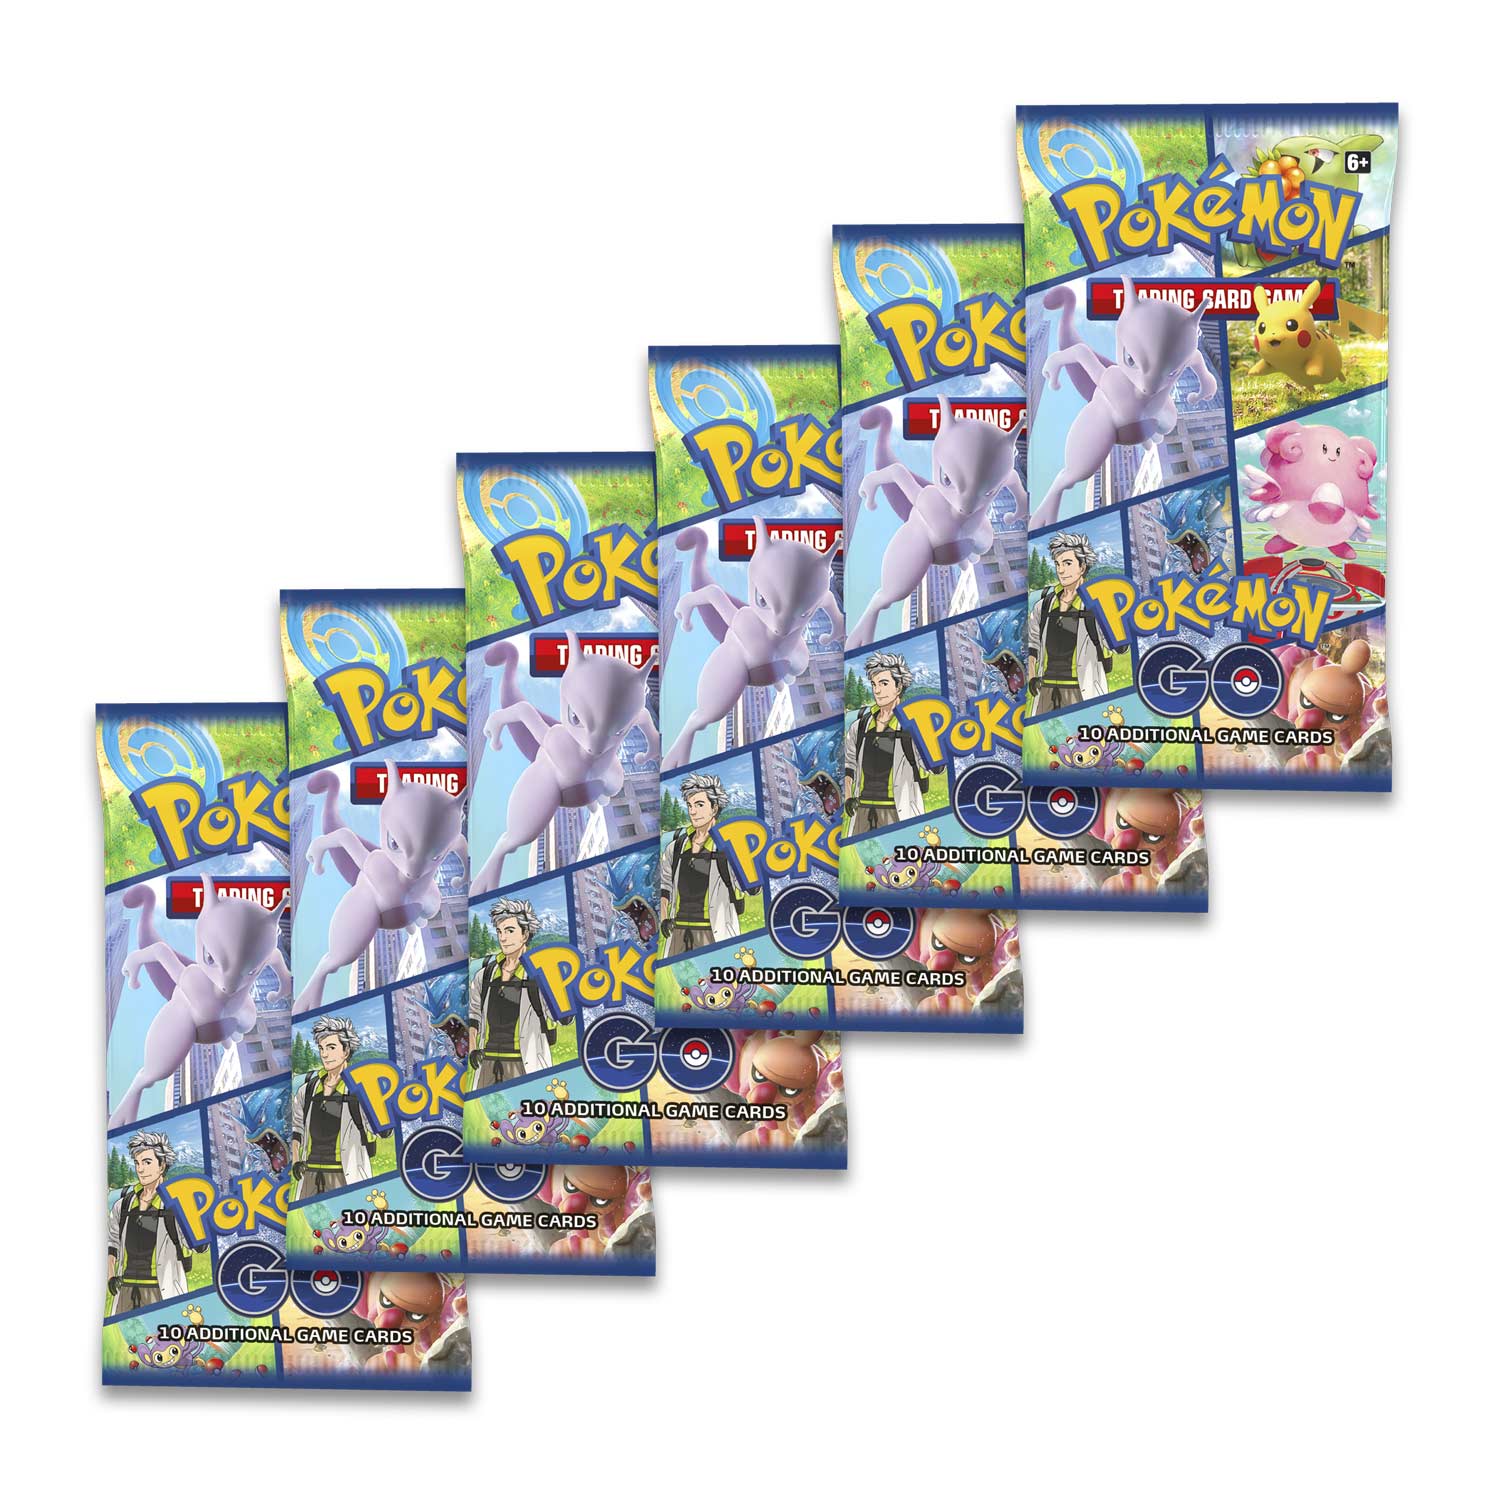 6 packs of pokemon go are included in this collection.